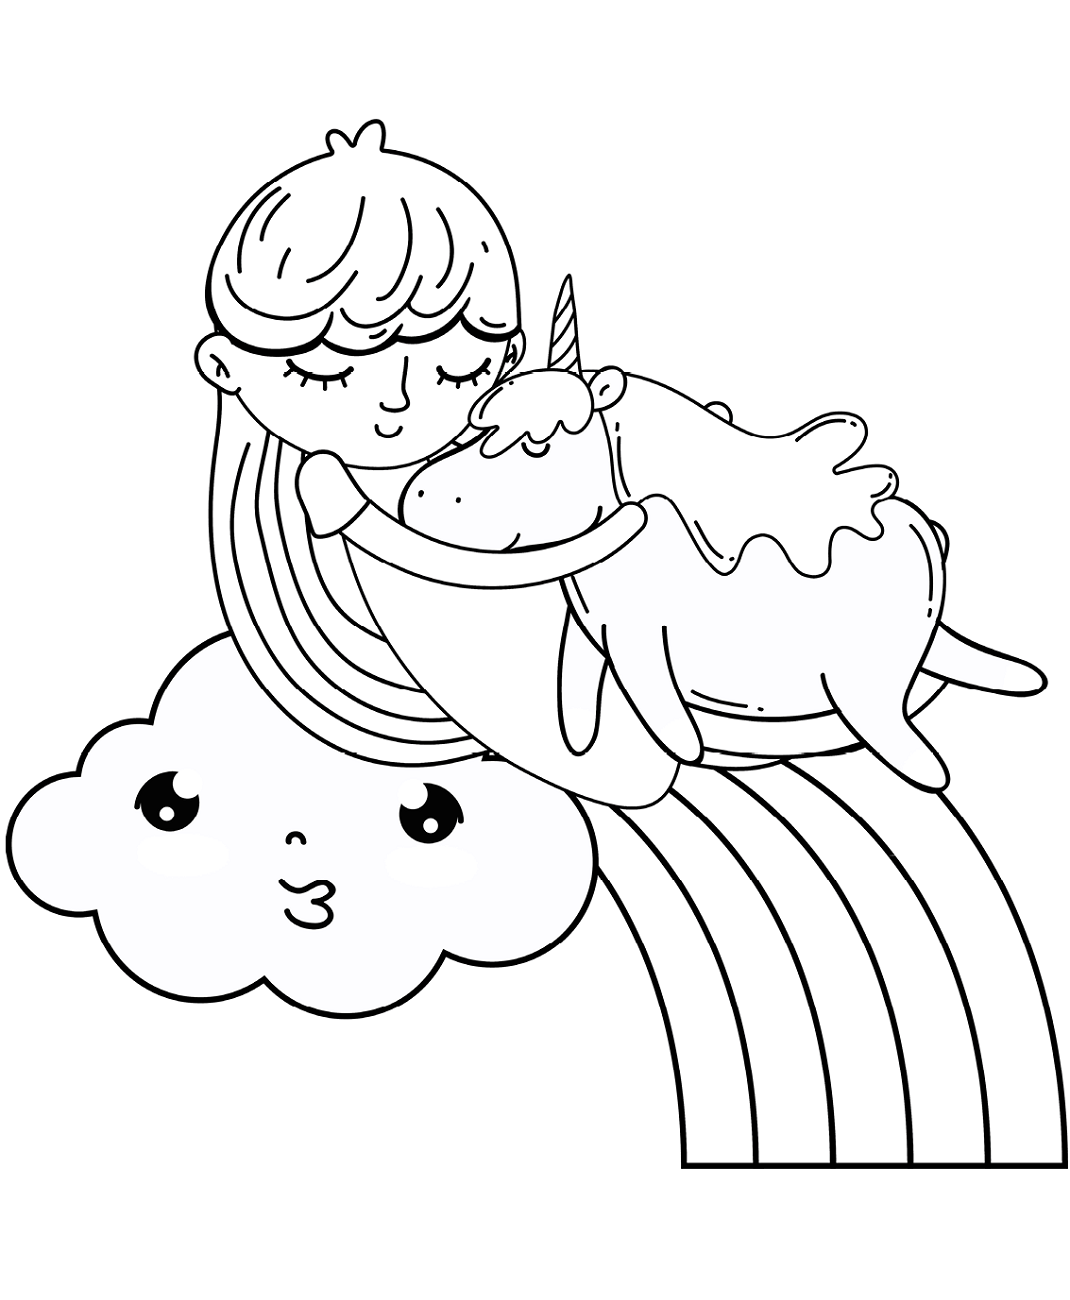 Girl Sleeping With Unicorn Coloring Page